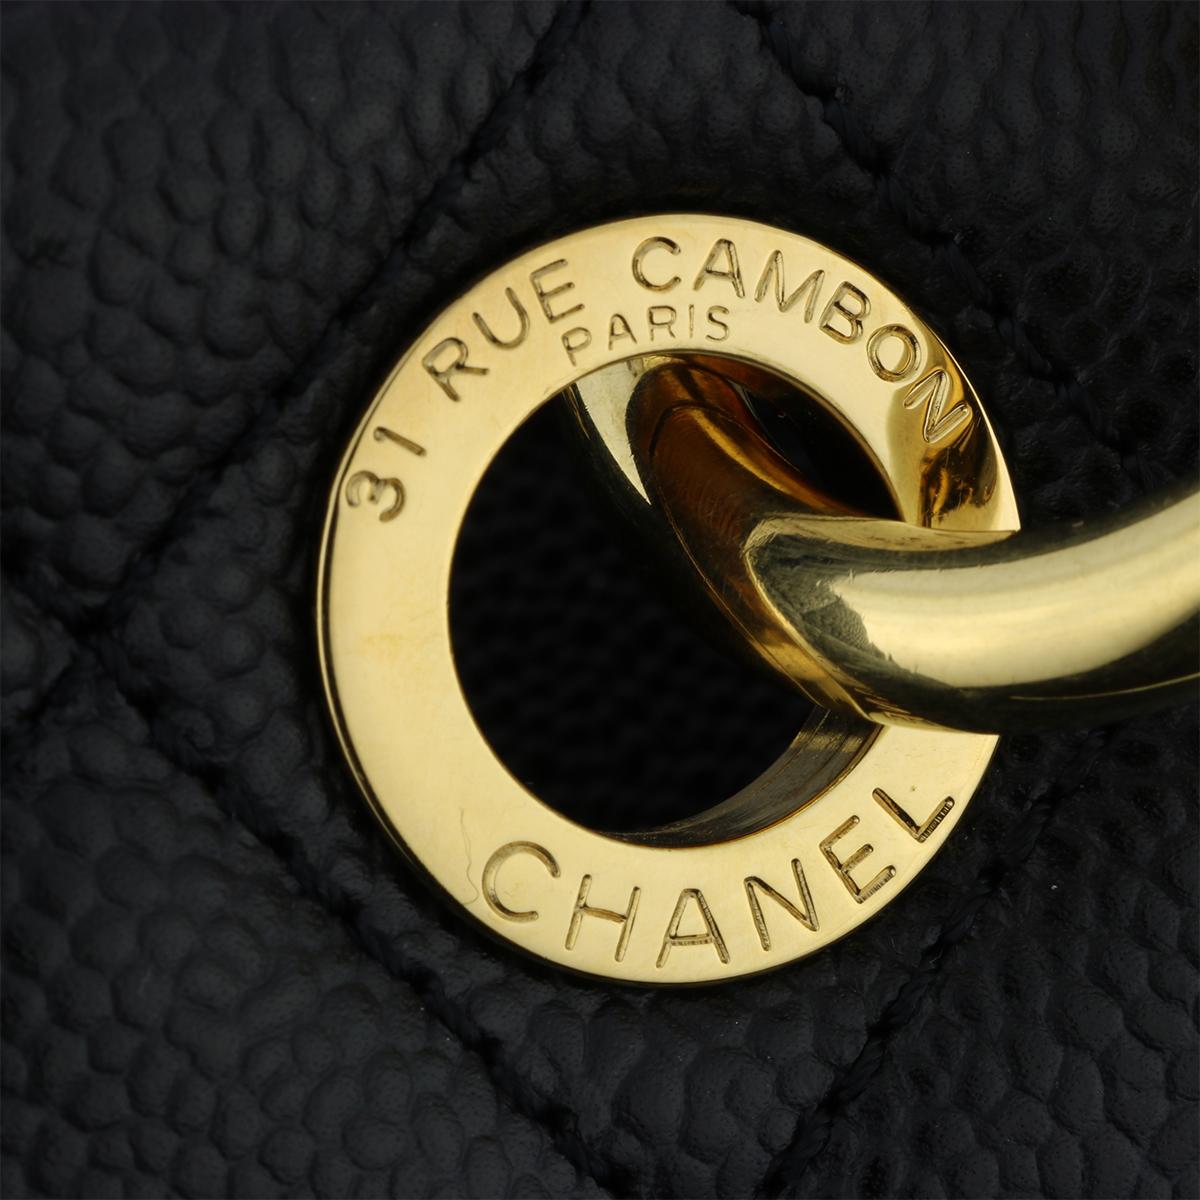 CHANEL Grand Shopping Tote (GST) Bag Black Caviar with Gold Hardware 2012 7